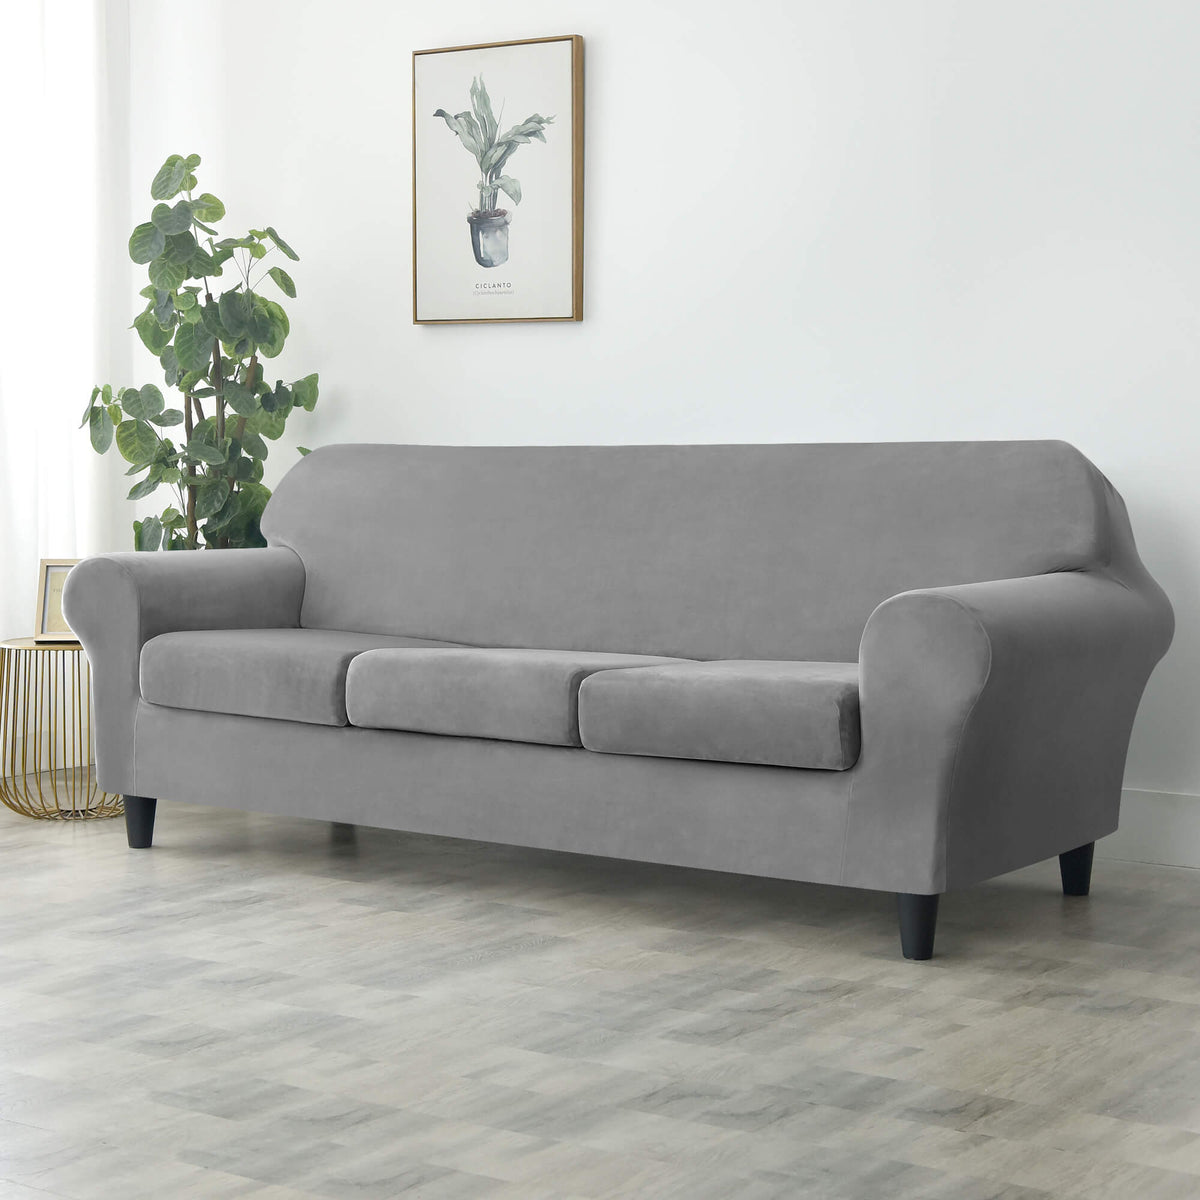 Crfatop Modern Couch Cover Stretch Armchair Sofa Seat Slipcovers with Elastic Bottom 3-seaterGrey